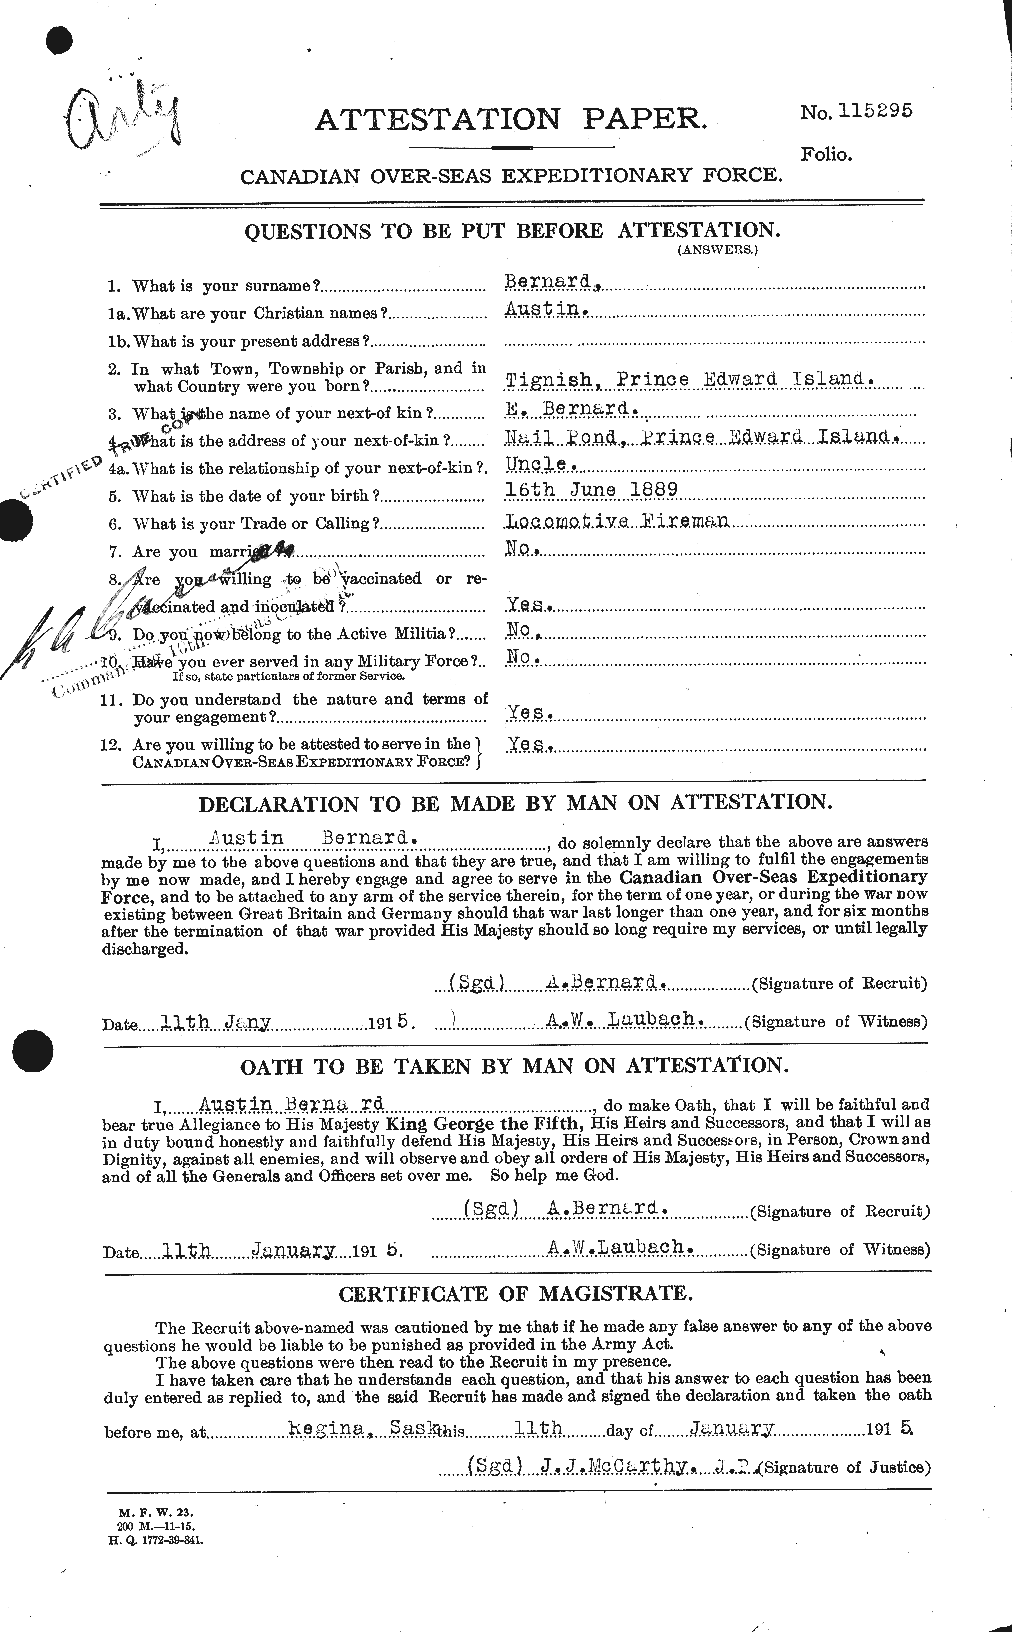 Personnel Records of the First World War - CEF 241922a